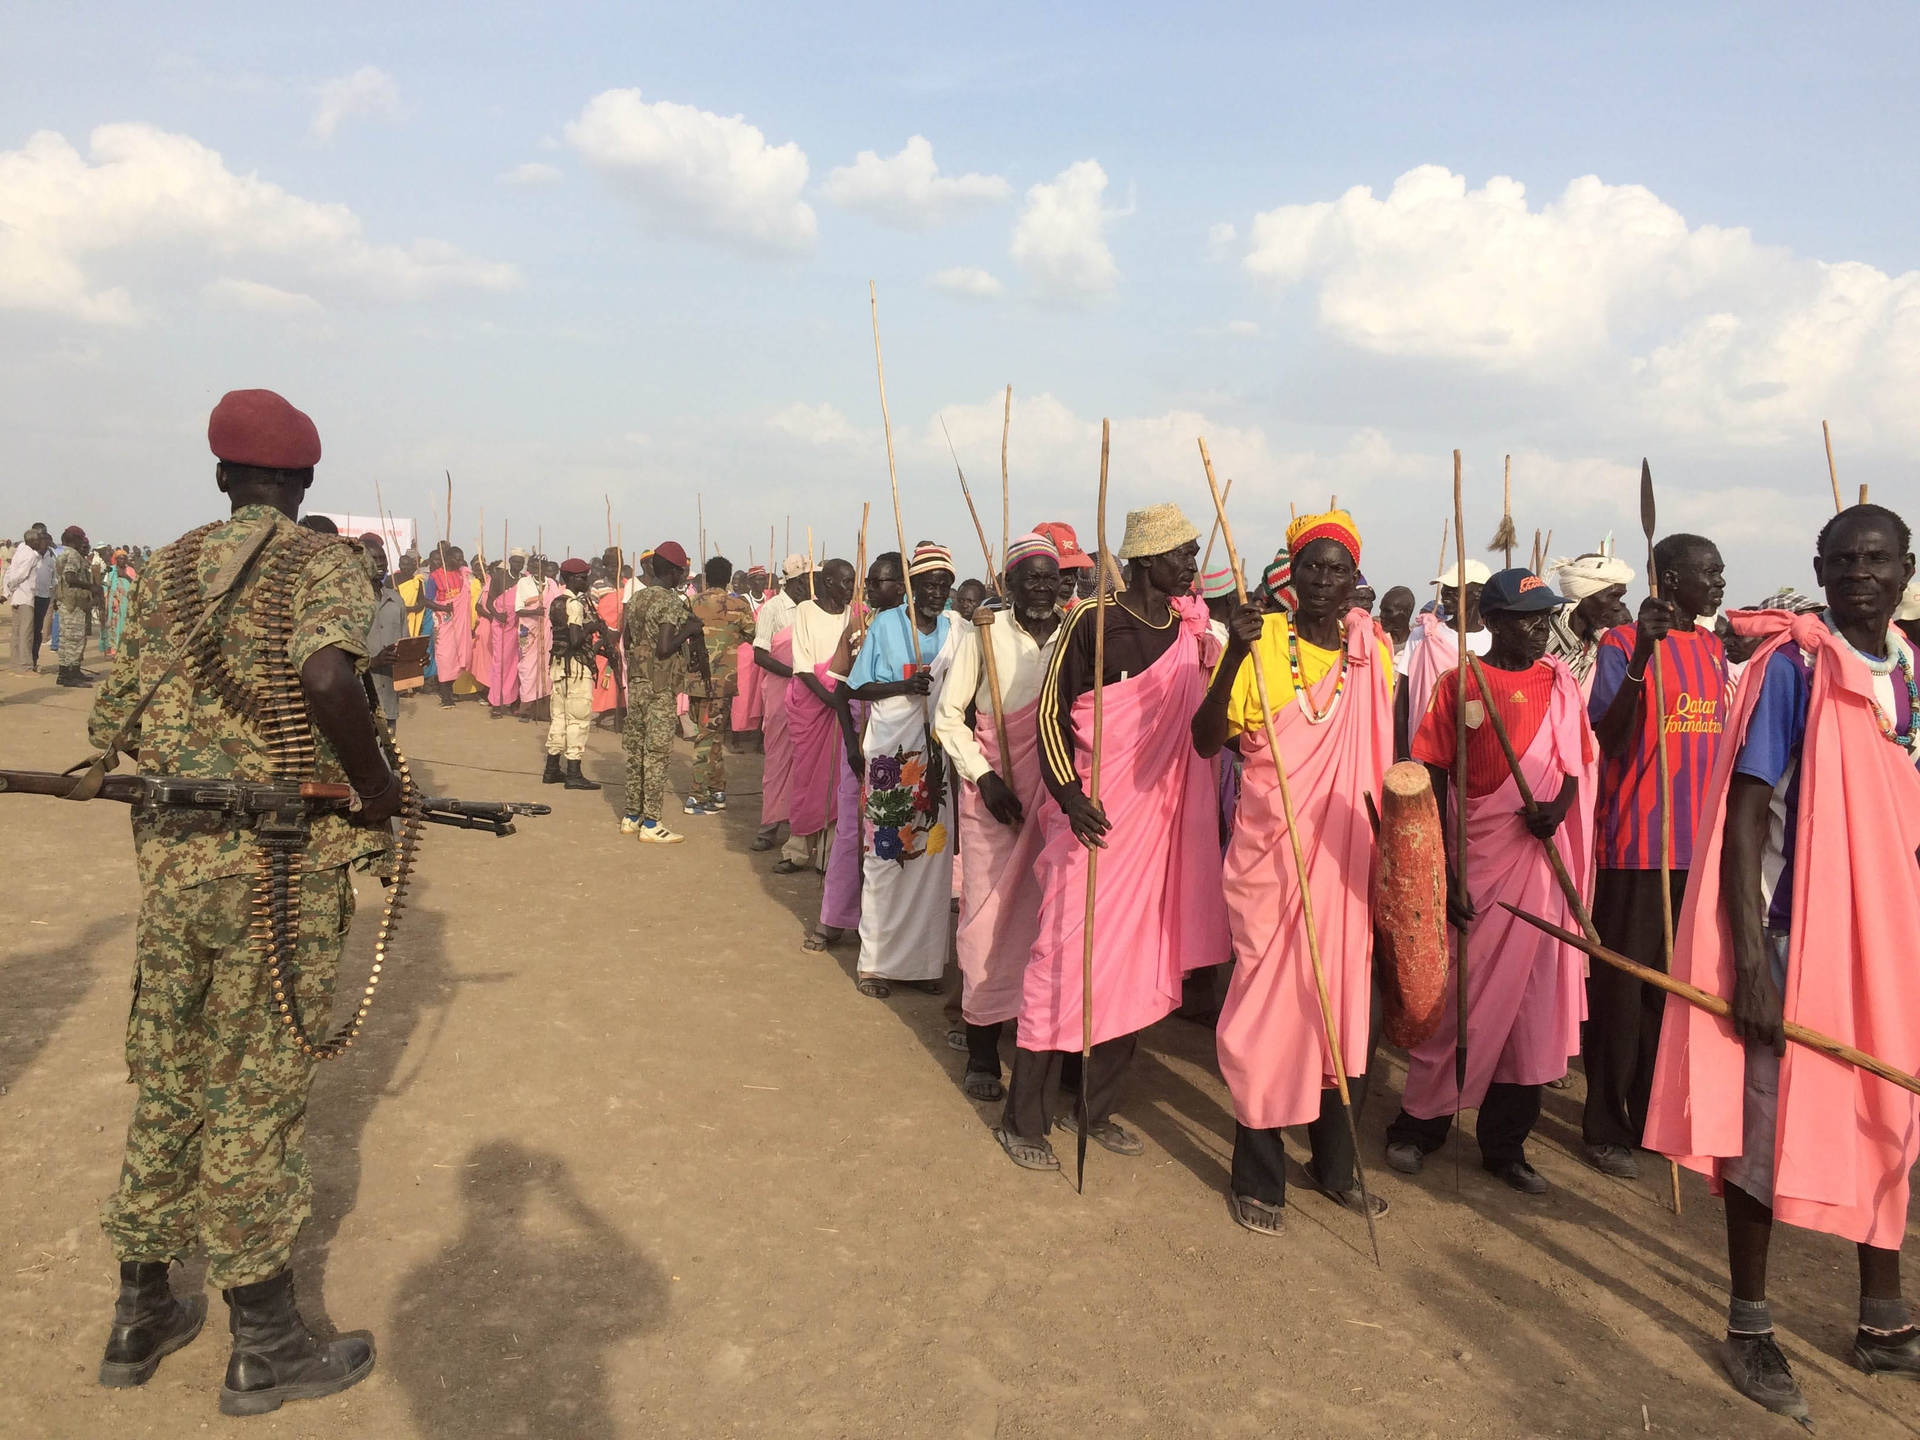 South Sudan Soldier in Vibrant Pink Clothing Wallpaper